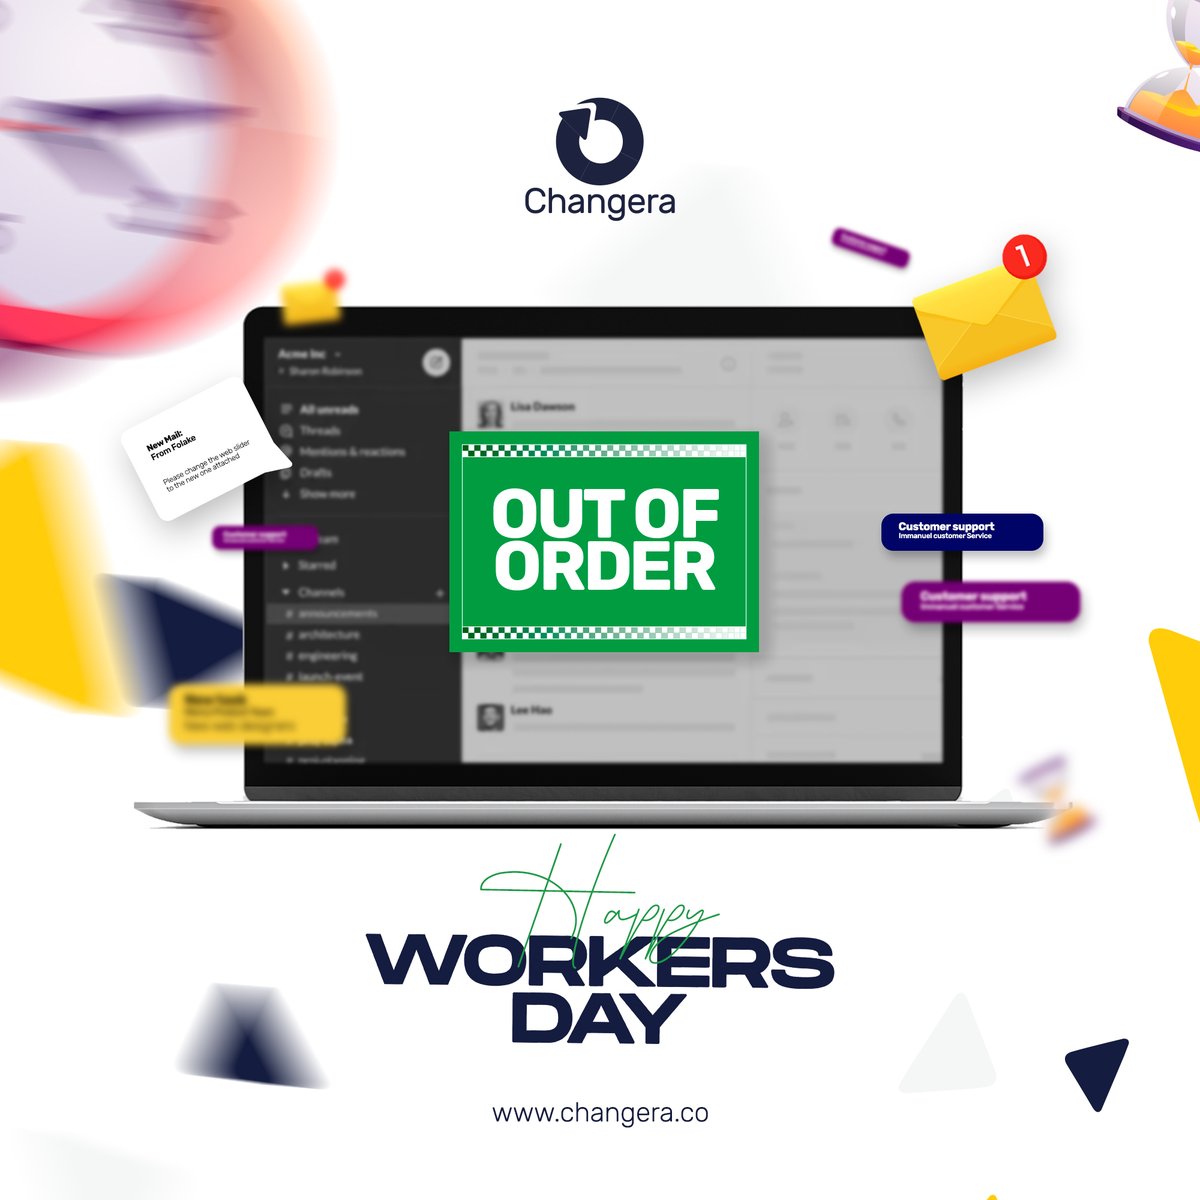 As you keep your laptops closed and your phones on DND on this #WorkersDay, remember Changera is always-on 24/7 for you to make your international payments 🌎 at any time easily and conveniently. 

Welcome to May! 😊